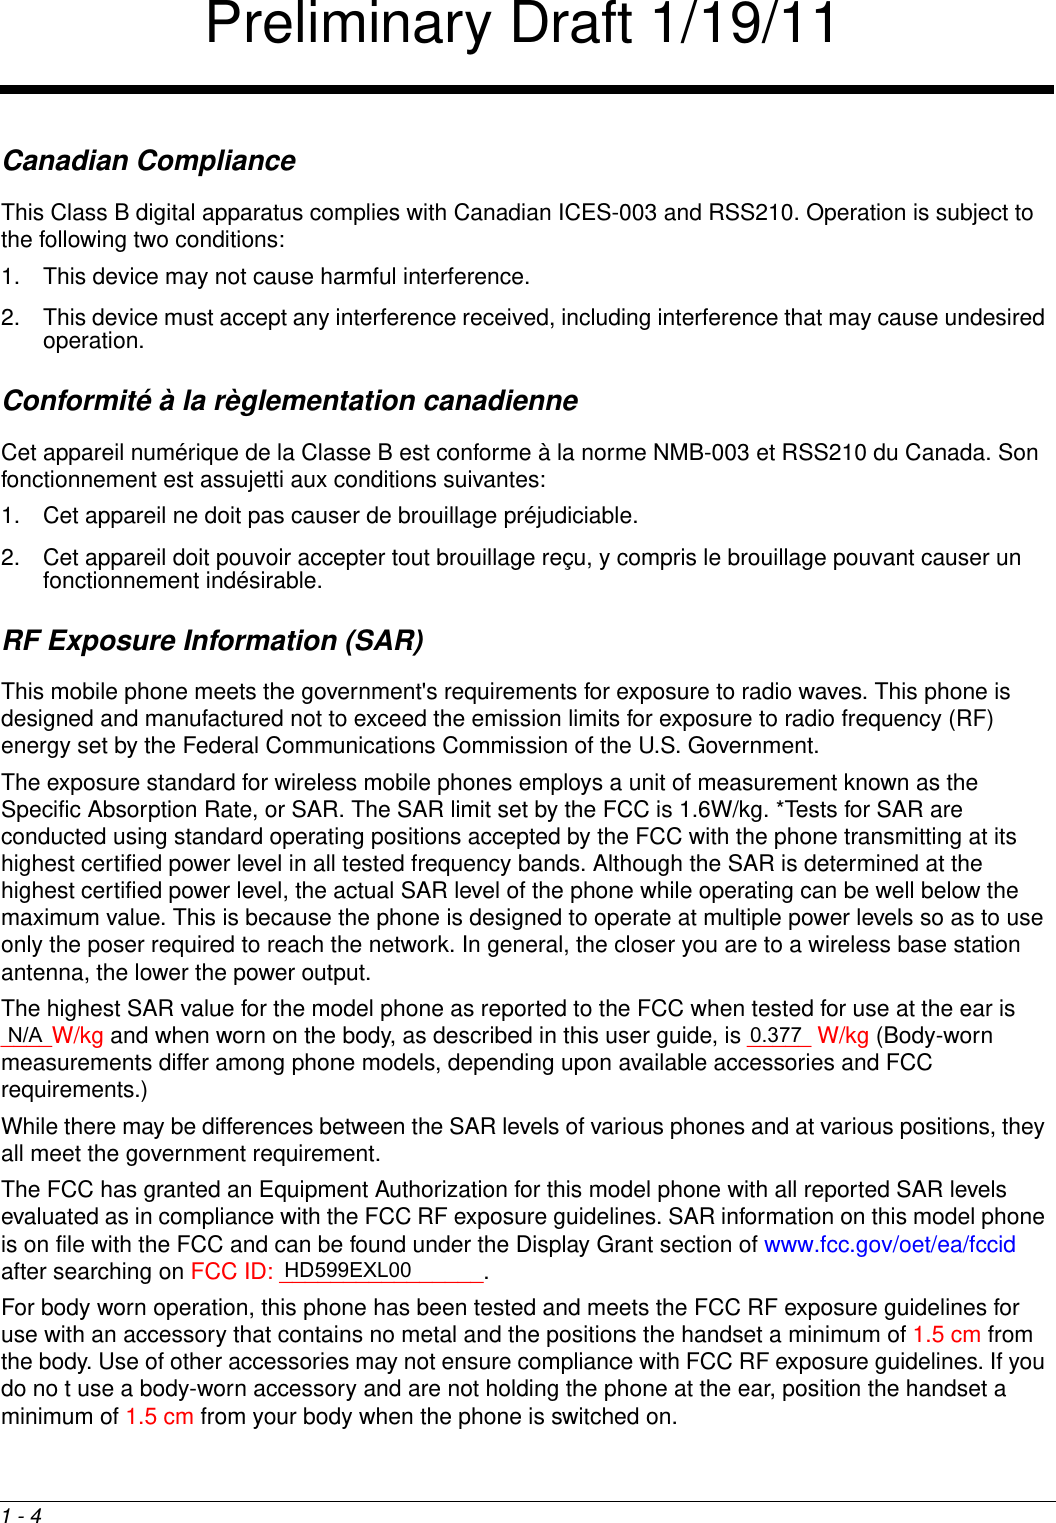 1 - 4Canadian ComplianceThis Class B digital apparatus complies with Canadian ICES-003 and RSS210. Operation is subject to the following two conditions: 1. This device may not cause harmful interference.2. This device must accept any interference received, including interference that may cause undesired operation. Conformité à la règlementation canadienneCet appareil numérique de la Classe B est conforme à la norme NMB-003 et RSS210 du Canada. Son fonctionnement est assujetti aux conditions suivantes: 1. Cet appareil ne doit pas causer de brouillage préjudiciable. 2. Cet appareil doit pouvoir accepter tout brouillage reçu, y compris le brouillage pouvant causer un fonctionnement indésirable.RF Exposure Information (SAR)This mobile phone meets the government&apos;s requirements for exposure to radio waves. This phone is designed and manufactured not to exceed the emission limits for exposure to radio frequency (RF) energy set by the Federal Communications Commission of the U.S. Government.The exposure standard for wireless mobile phones employs a unit of measurement known as the Specific Absorption Rate, or SAR. The SAR limit set by the FCC is 1.6W/kg. *Tests for SAR are conducted using standard operating positions accepted by the FCC with the phone transmitting at its highest certified power level in all tested frequency bands. Although the SAR is determined at the highest certified power level, the actual SAR level of the phone while operating can be well below the maximum value. This is because the phone is designed to operate at multiple power levels so as to use only the poser required to reach the network. In general, the closer you are to a wireless base station antenna, the lower the power output.The highest SAR value for the model phone as reported to the FCC when tested for use at the ear is ____W/kg and when worn on the body, as described in this user guide, is _____ W/kg (Body-worn measurements differ among phone models, depending upon available accessories and FCC requirements.)While there may be differences between the SAR levels of various phones and at various positions, they all meet the government requirement.The FCC has granted an Equipment Authorization for this model phone with all reported SAR levels evaluated as in compliance with the FCC RF exposure guidelines. SAR information on this model phone is on file with the FCC and can be found under the Display Grant section of www.fcc.gov/oet/ea/fccid after searching on FCC ID: ________________.For body worn operation, this phone has been tested and meets the FCC RF exposure guidelines for use with an accessory that contains no metal and the positions the handset a minimum of 1.5 cm from the body. Use of other accessories may not ensure compliance with FCC RF exposure guidelines. If you do no t use a body-worn accessory and are not holding the phone at the ear, position the handset a minimum of 1.5 cm from your body when the phone is switched on.Preliminary Draft 1/19/11